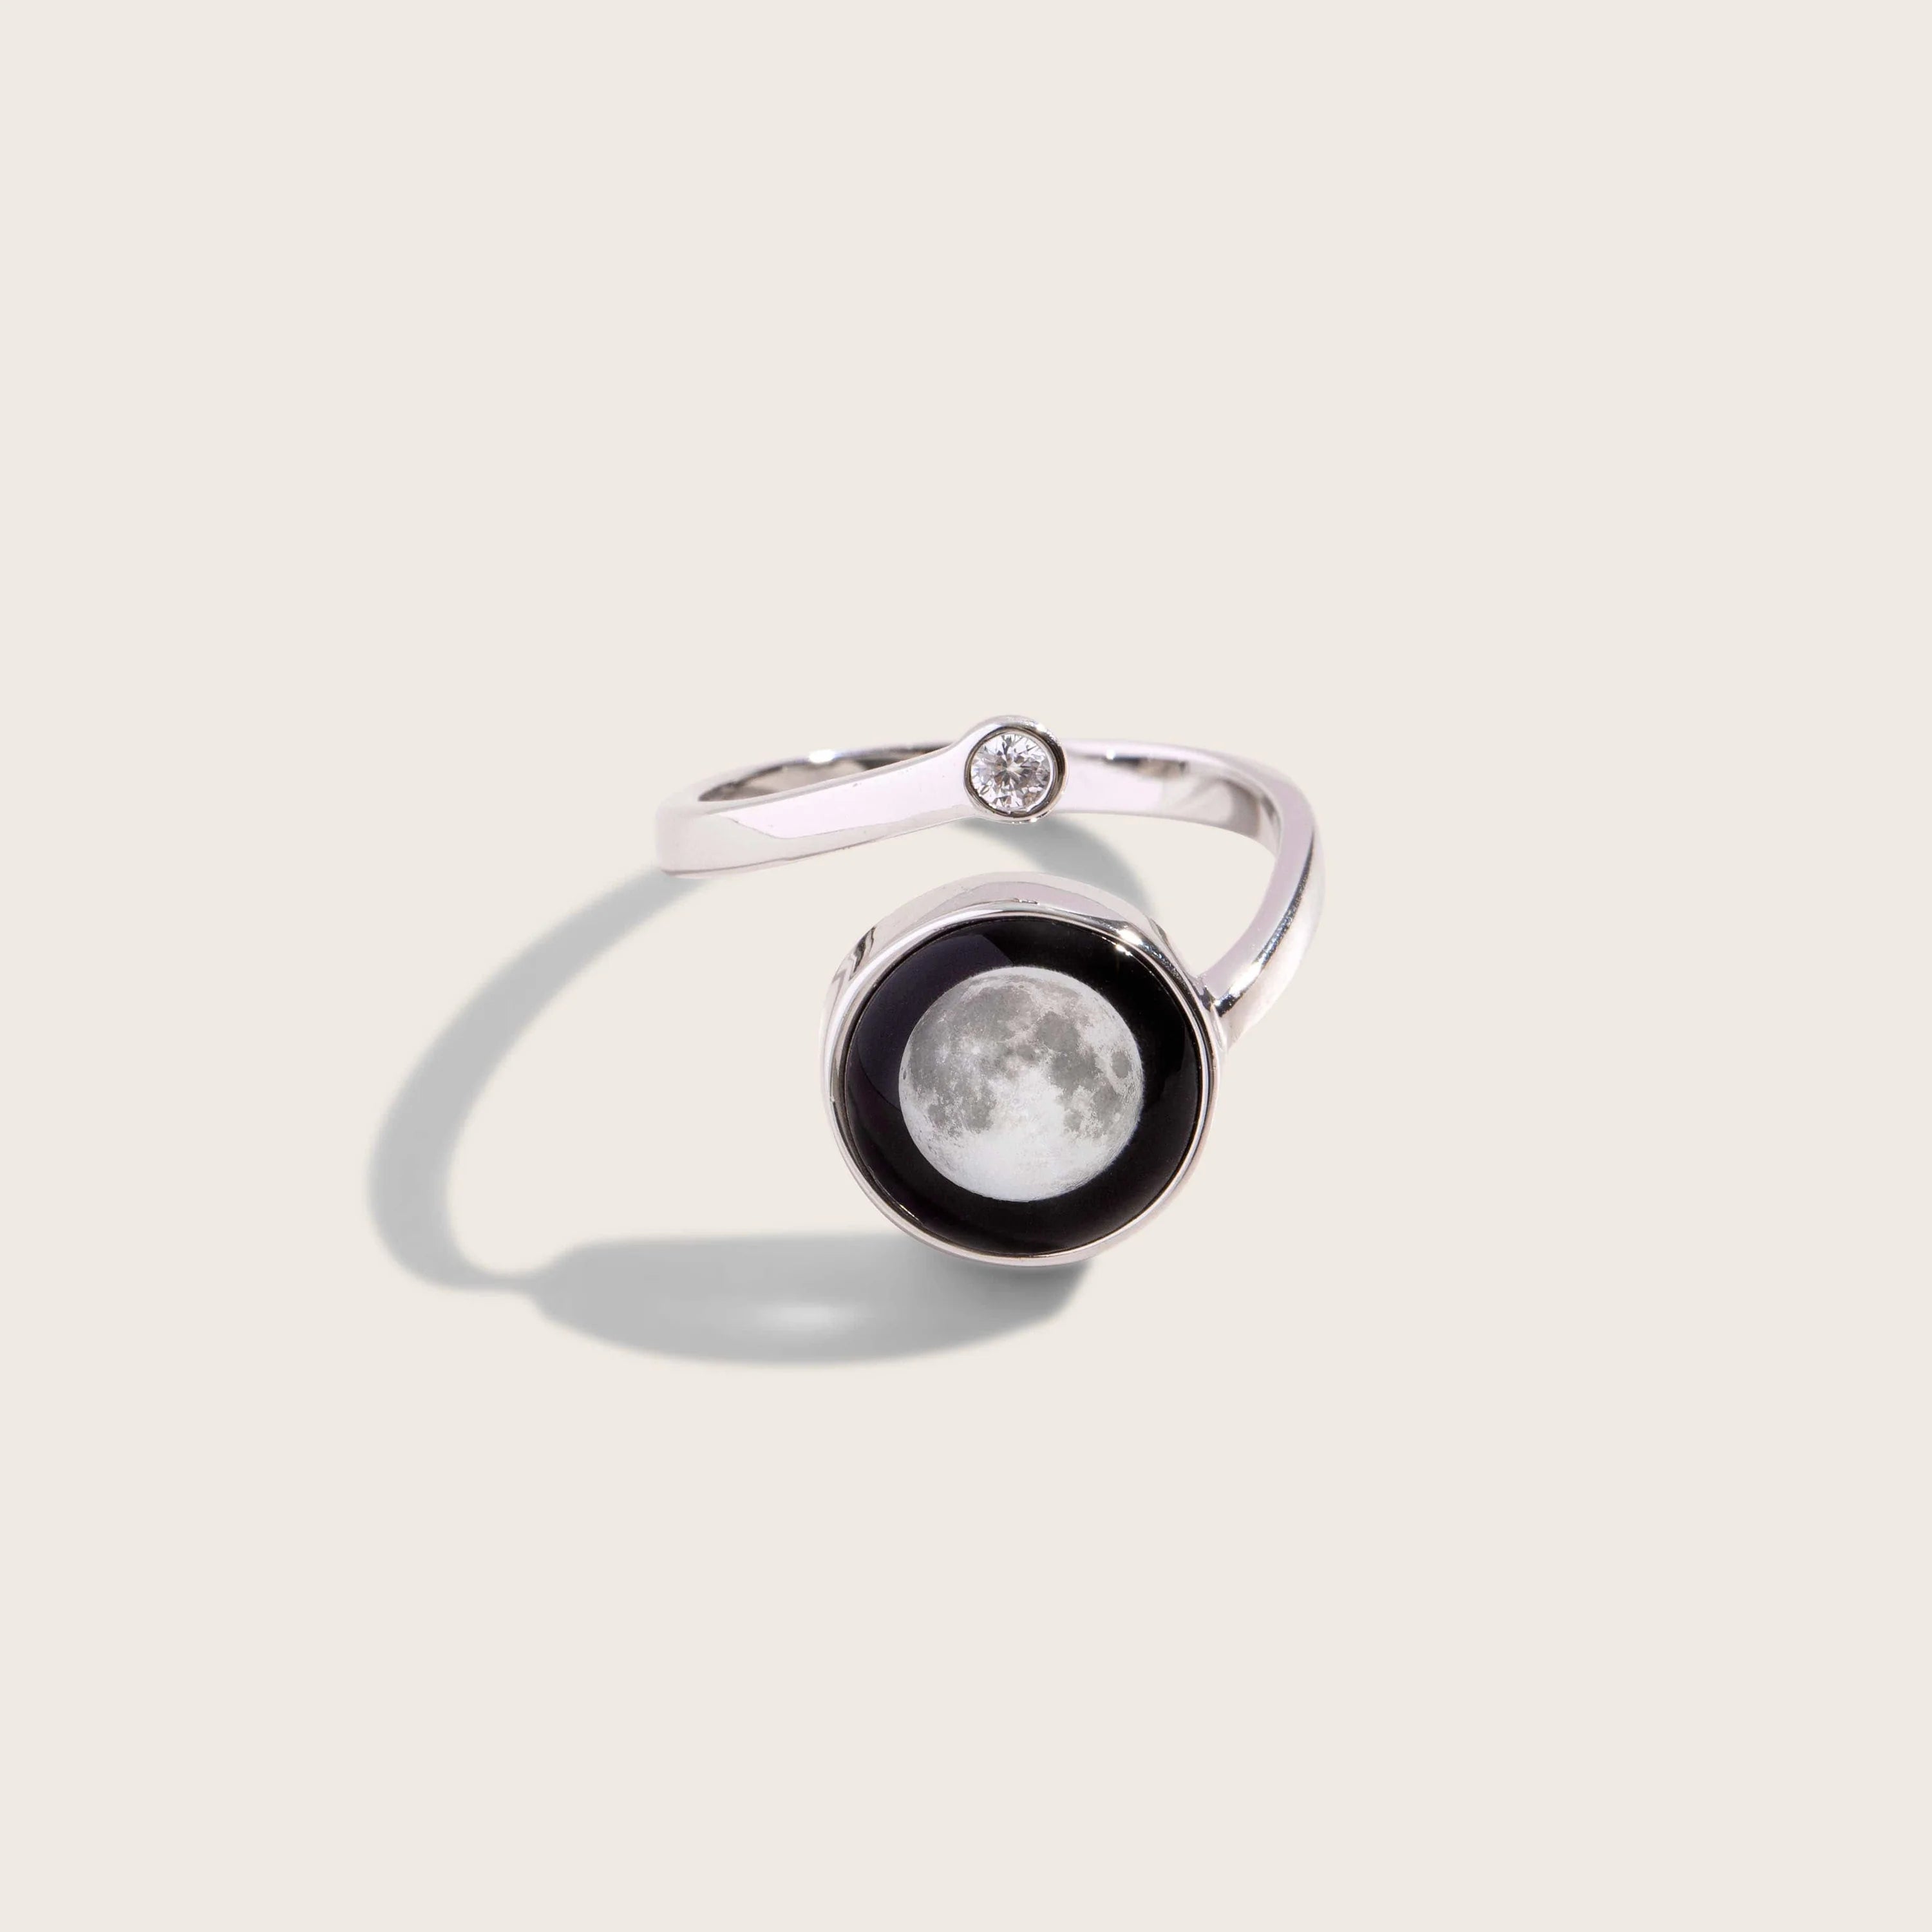 Moonglow Cosmic Spiral Adjustable Ring - Silver